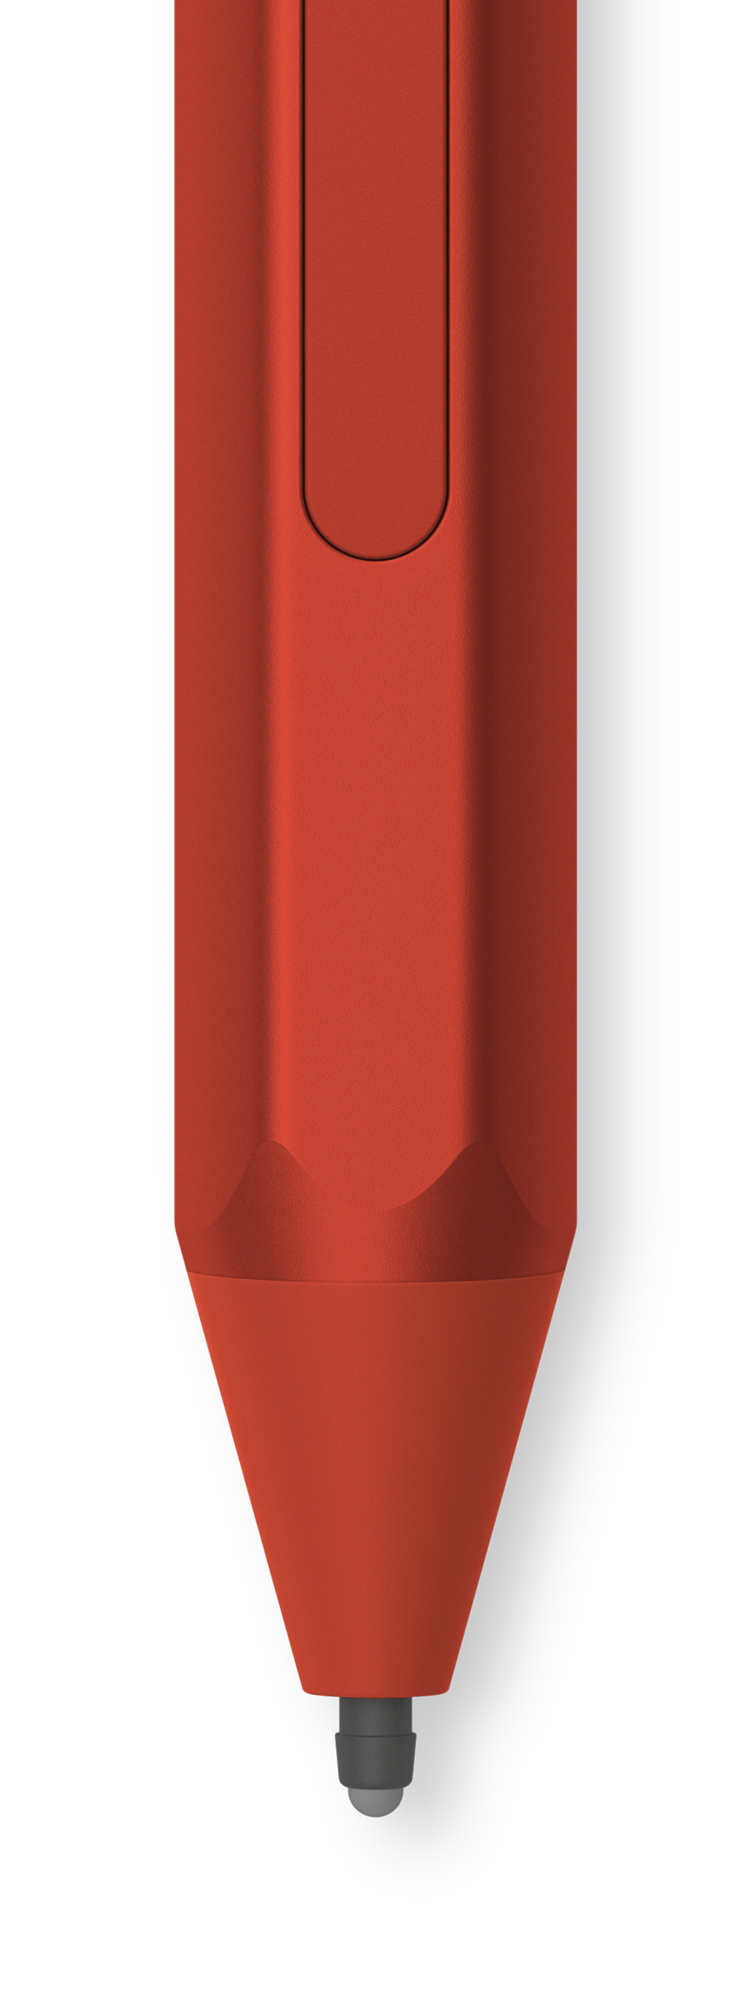 MS Surface Pen Com M1776 Poppy Red